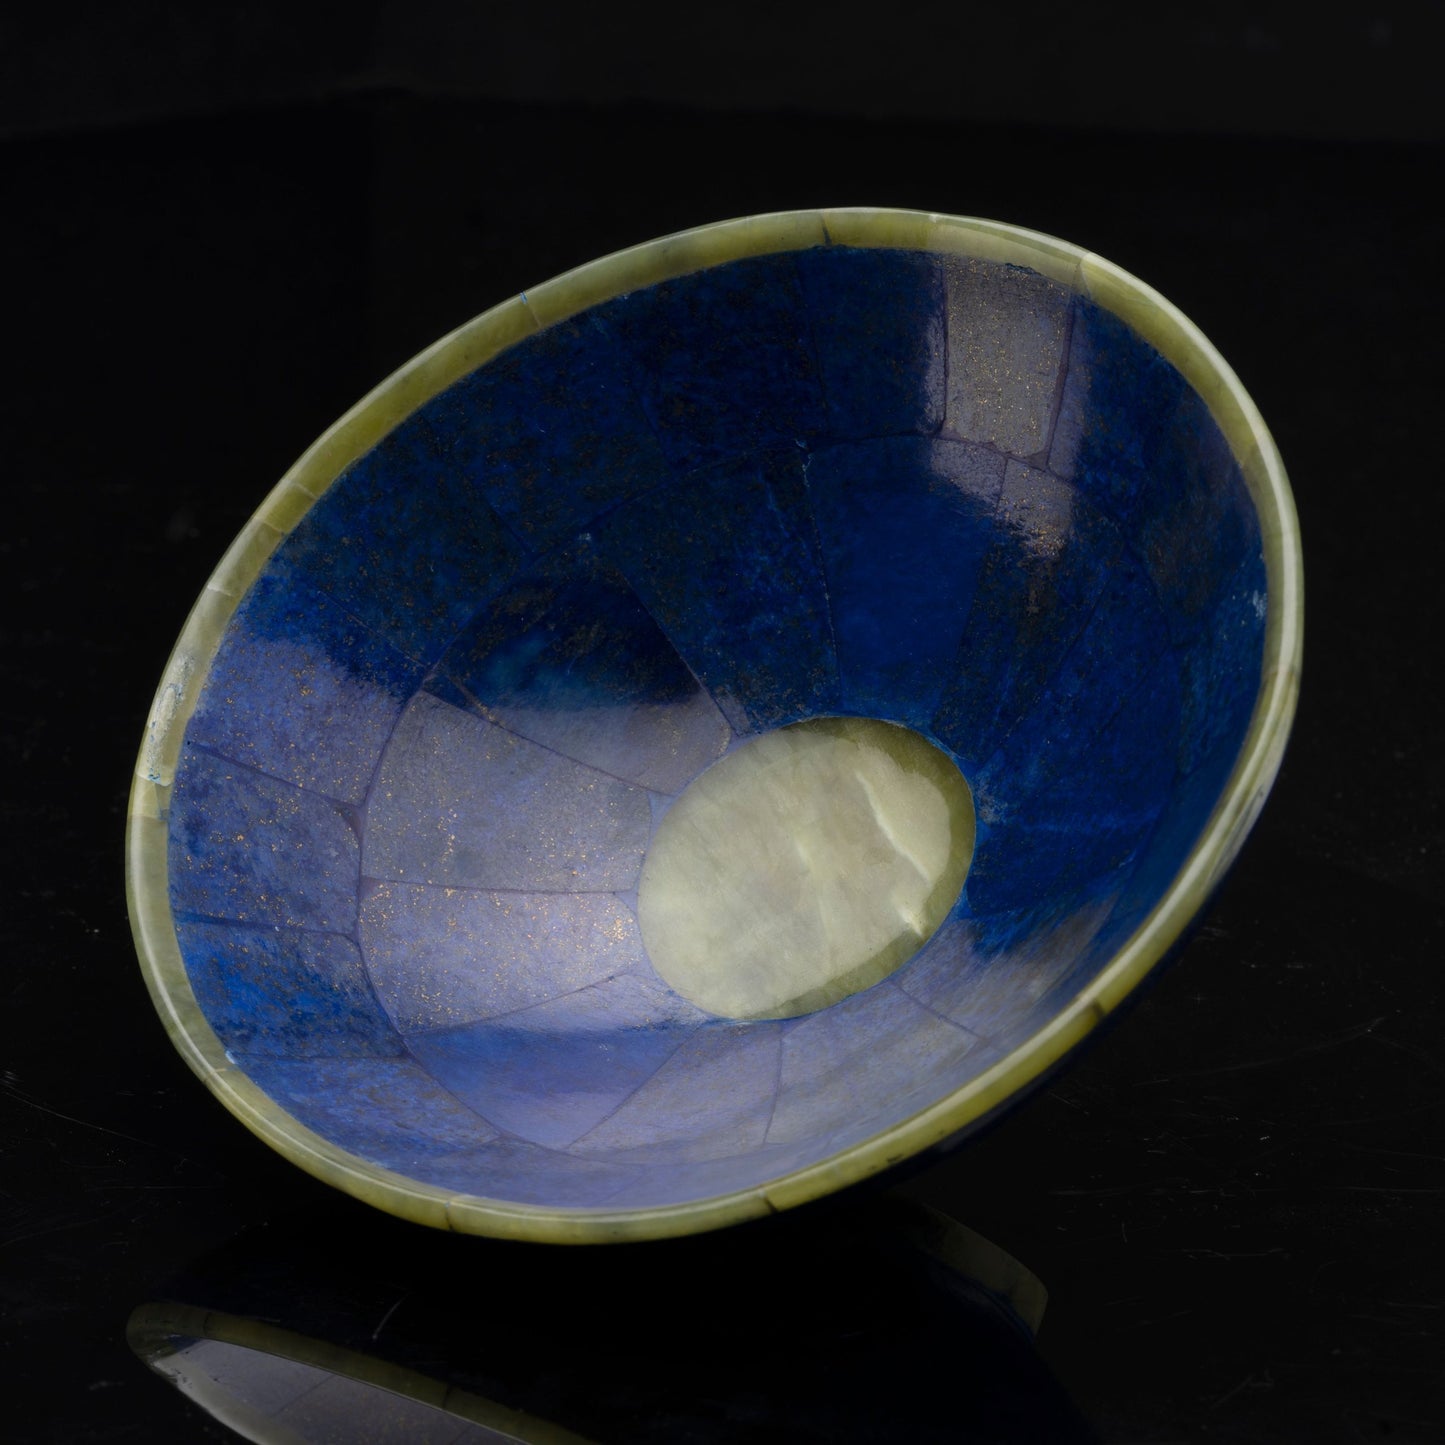 Handcrafted Jade and Lapis Lazuli Bowl